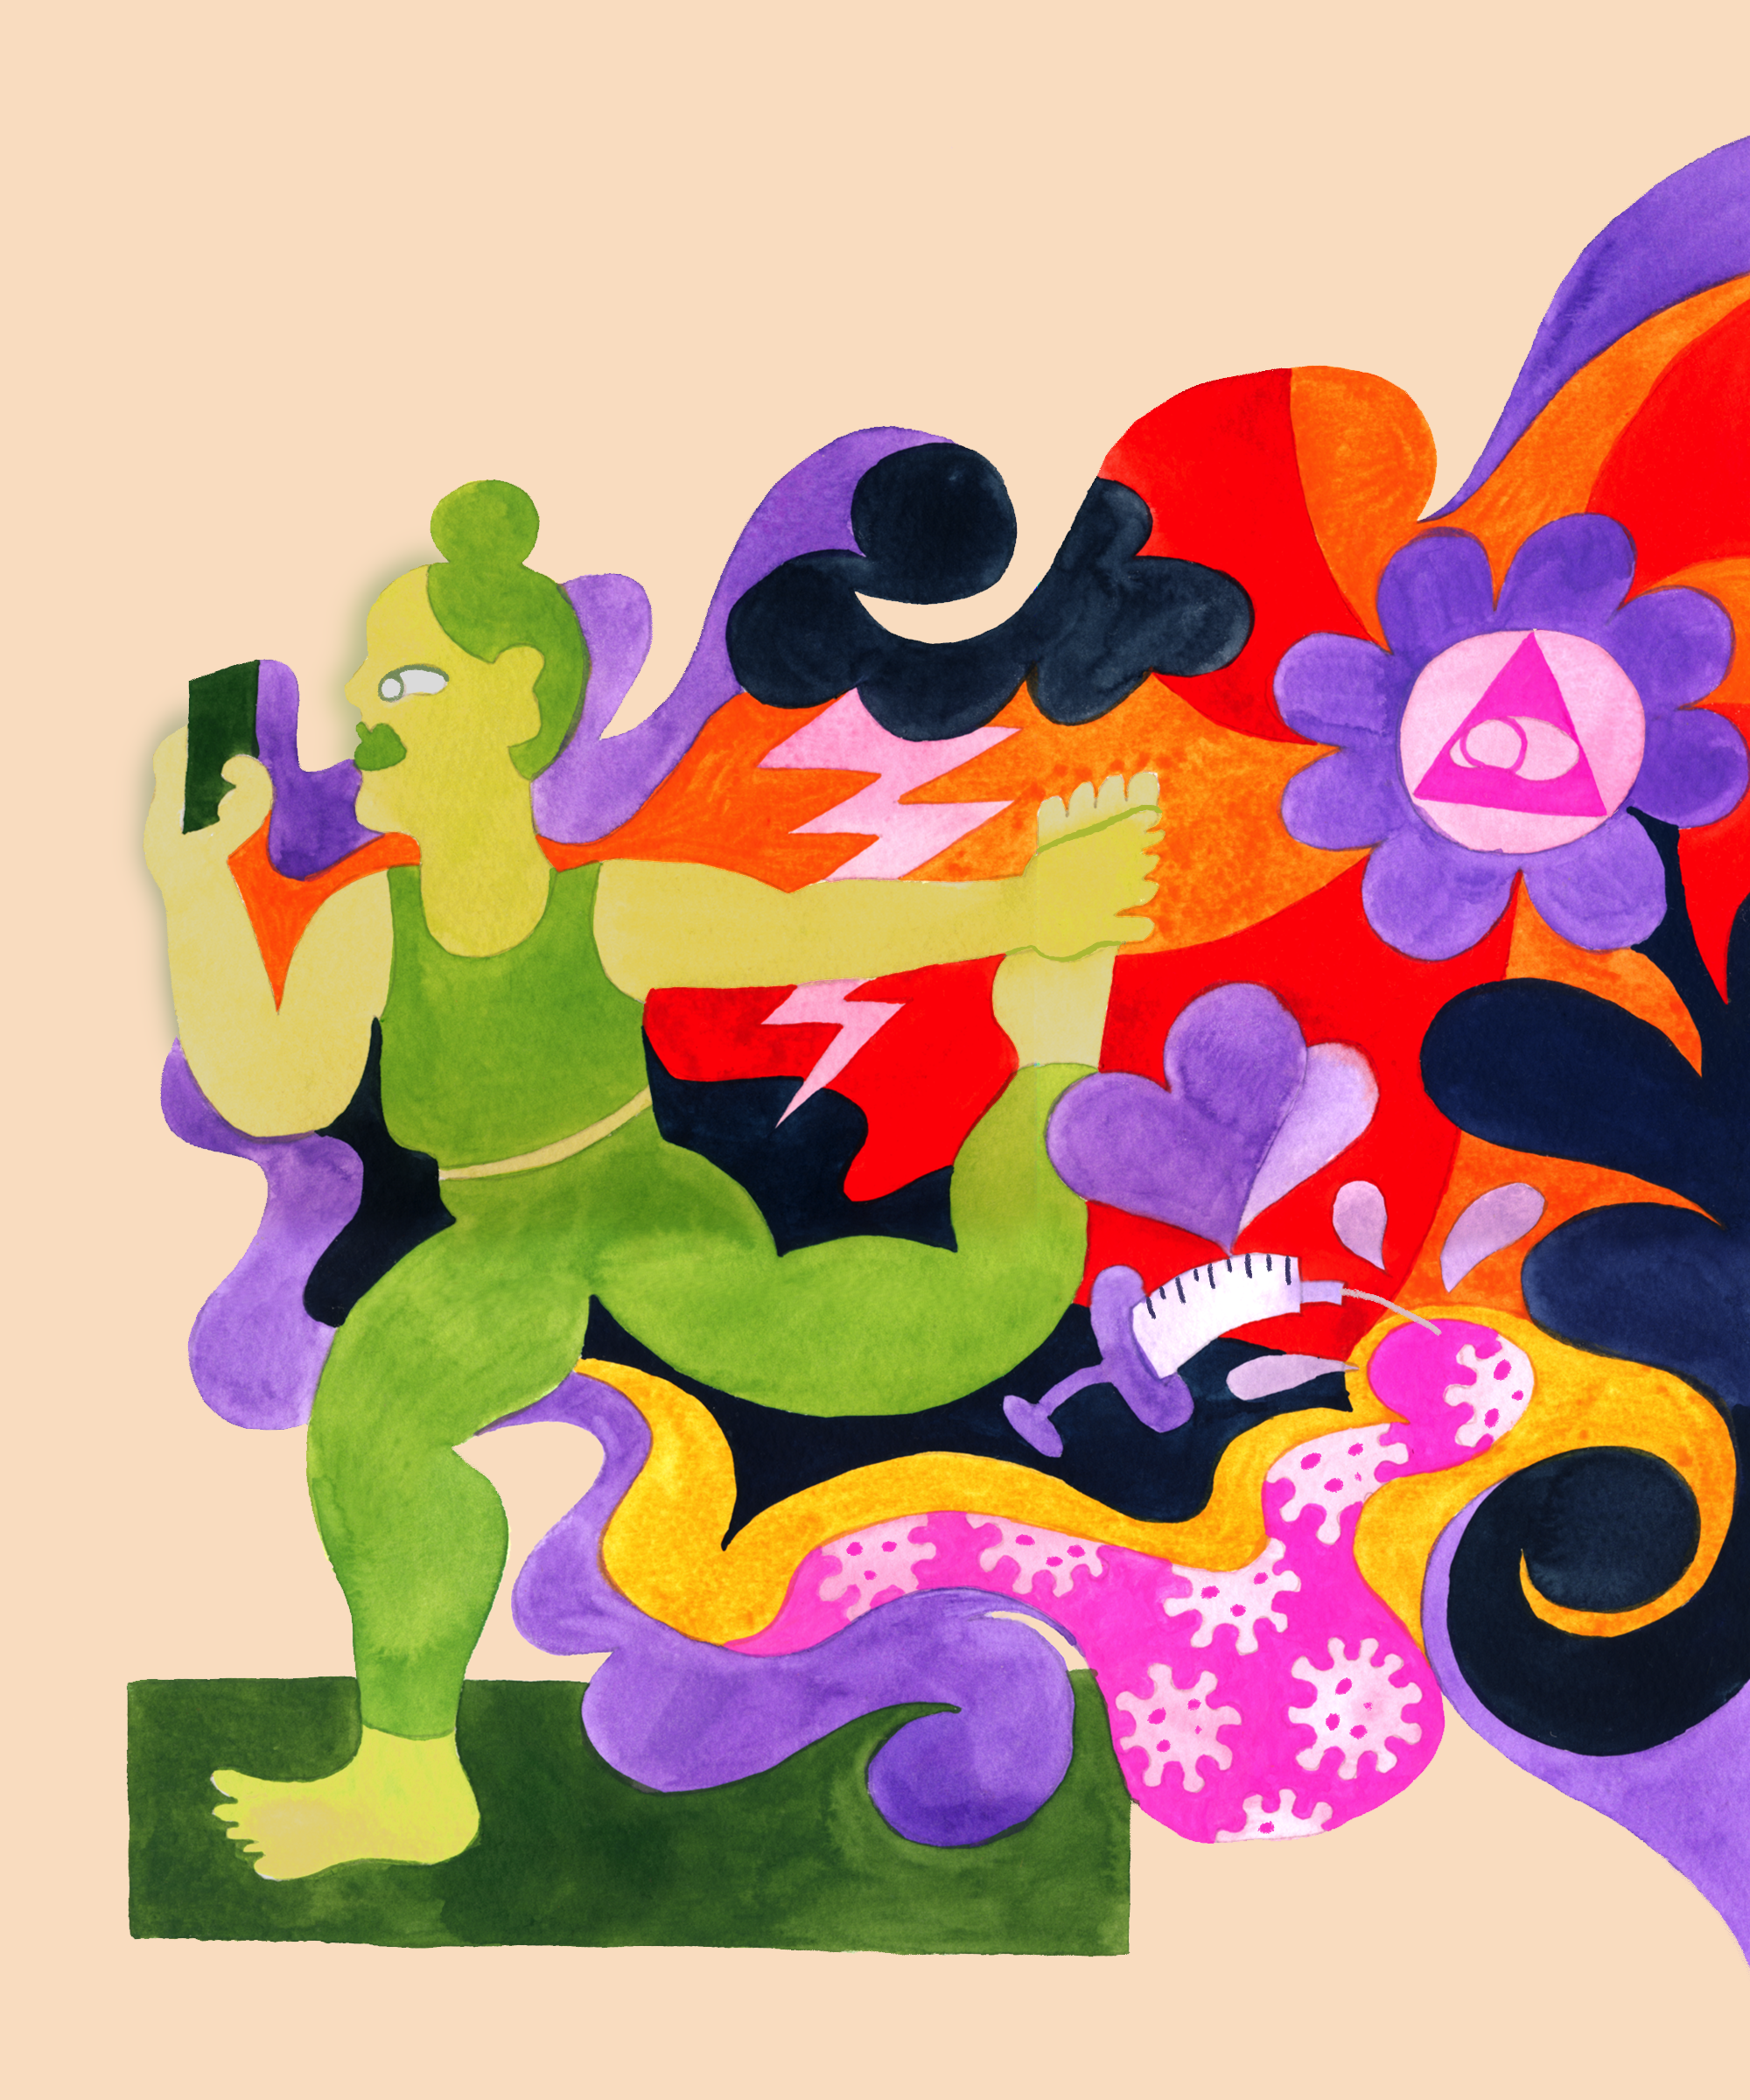 Editorial illustration for Refinery29